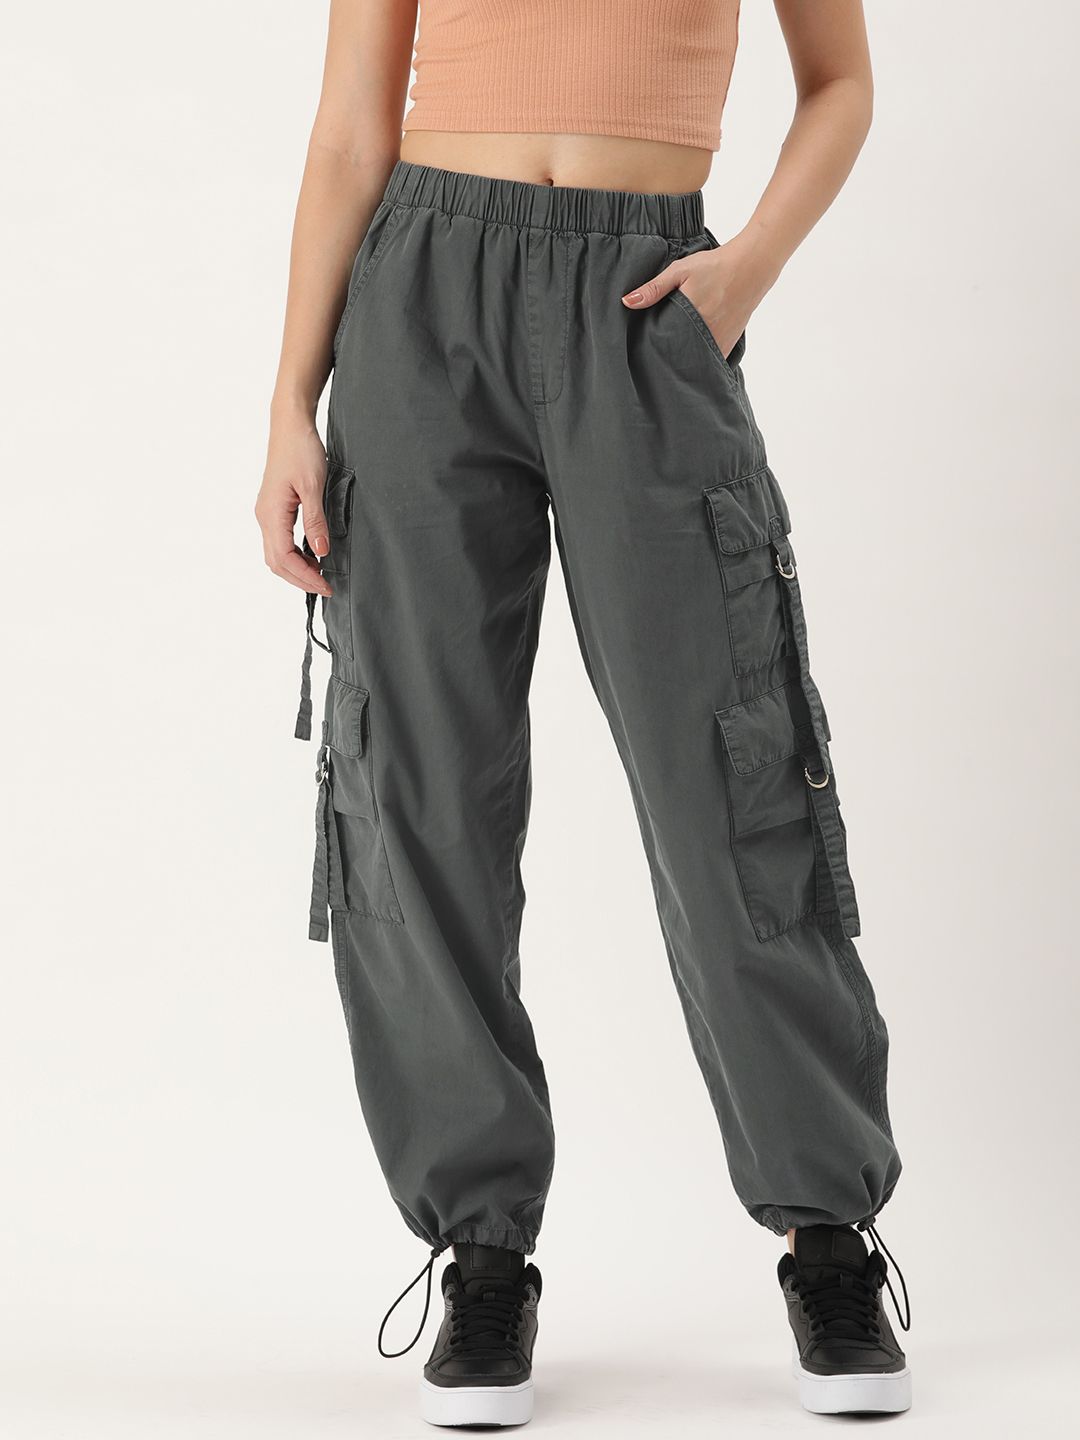 Bene Kleed Women Parachute Fit High-Rise Cotton Cargo Trousers Price in India